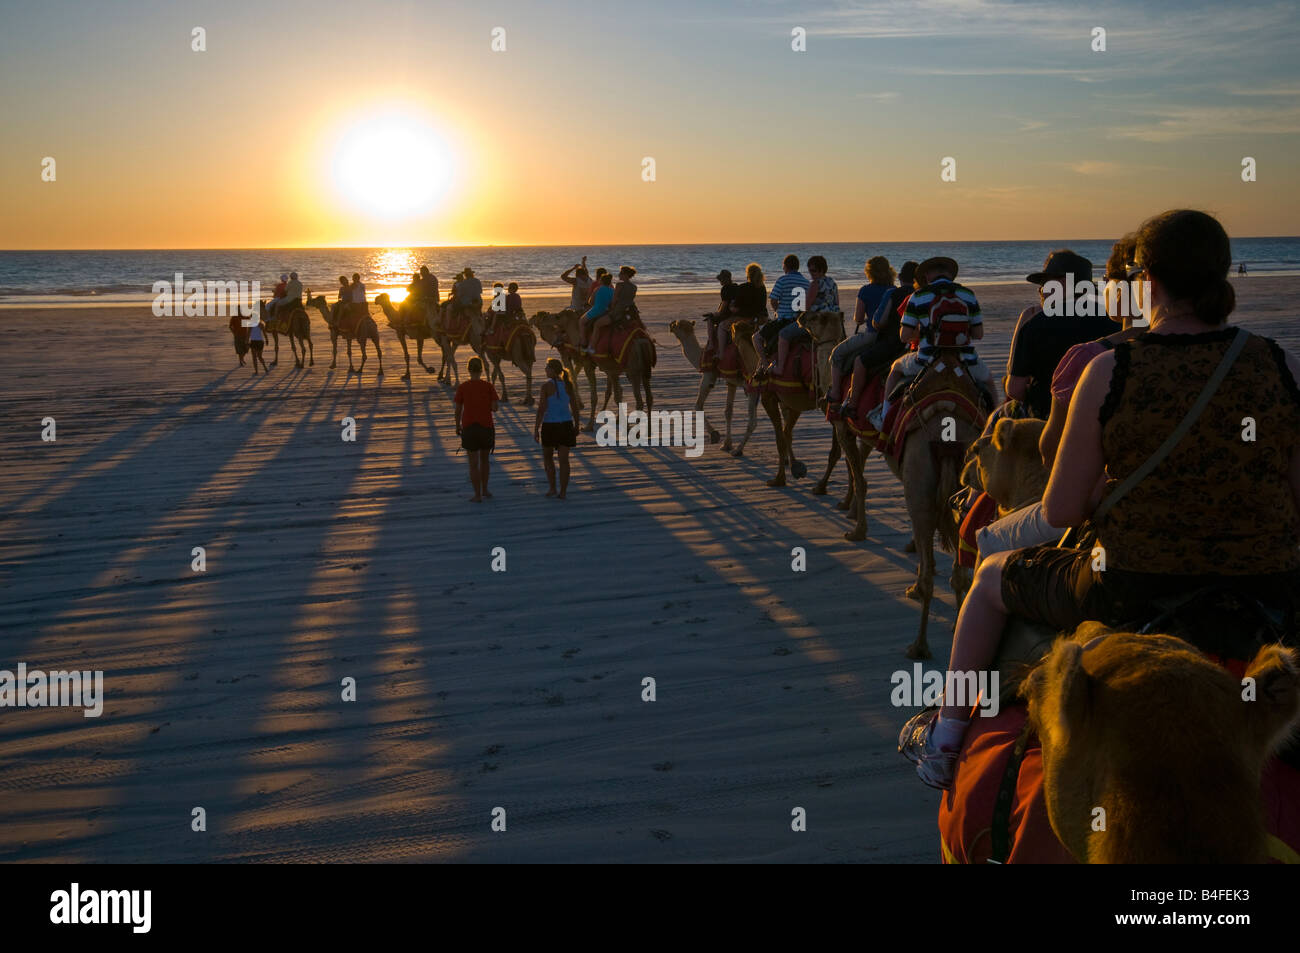 Camel riding at sunset on Cable Beach Broome Western Australia Stock Photo